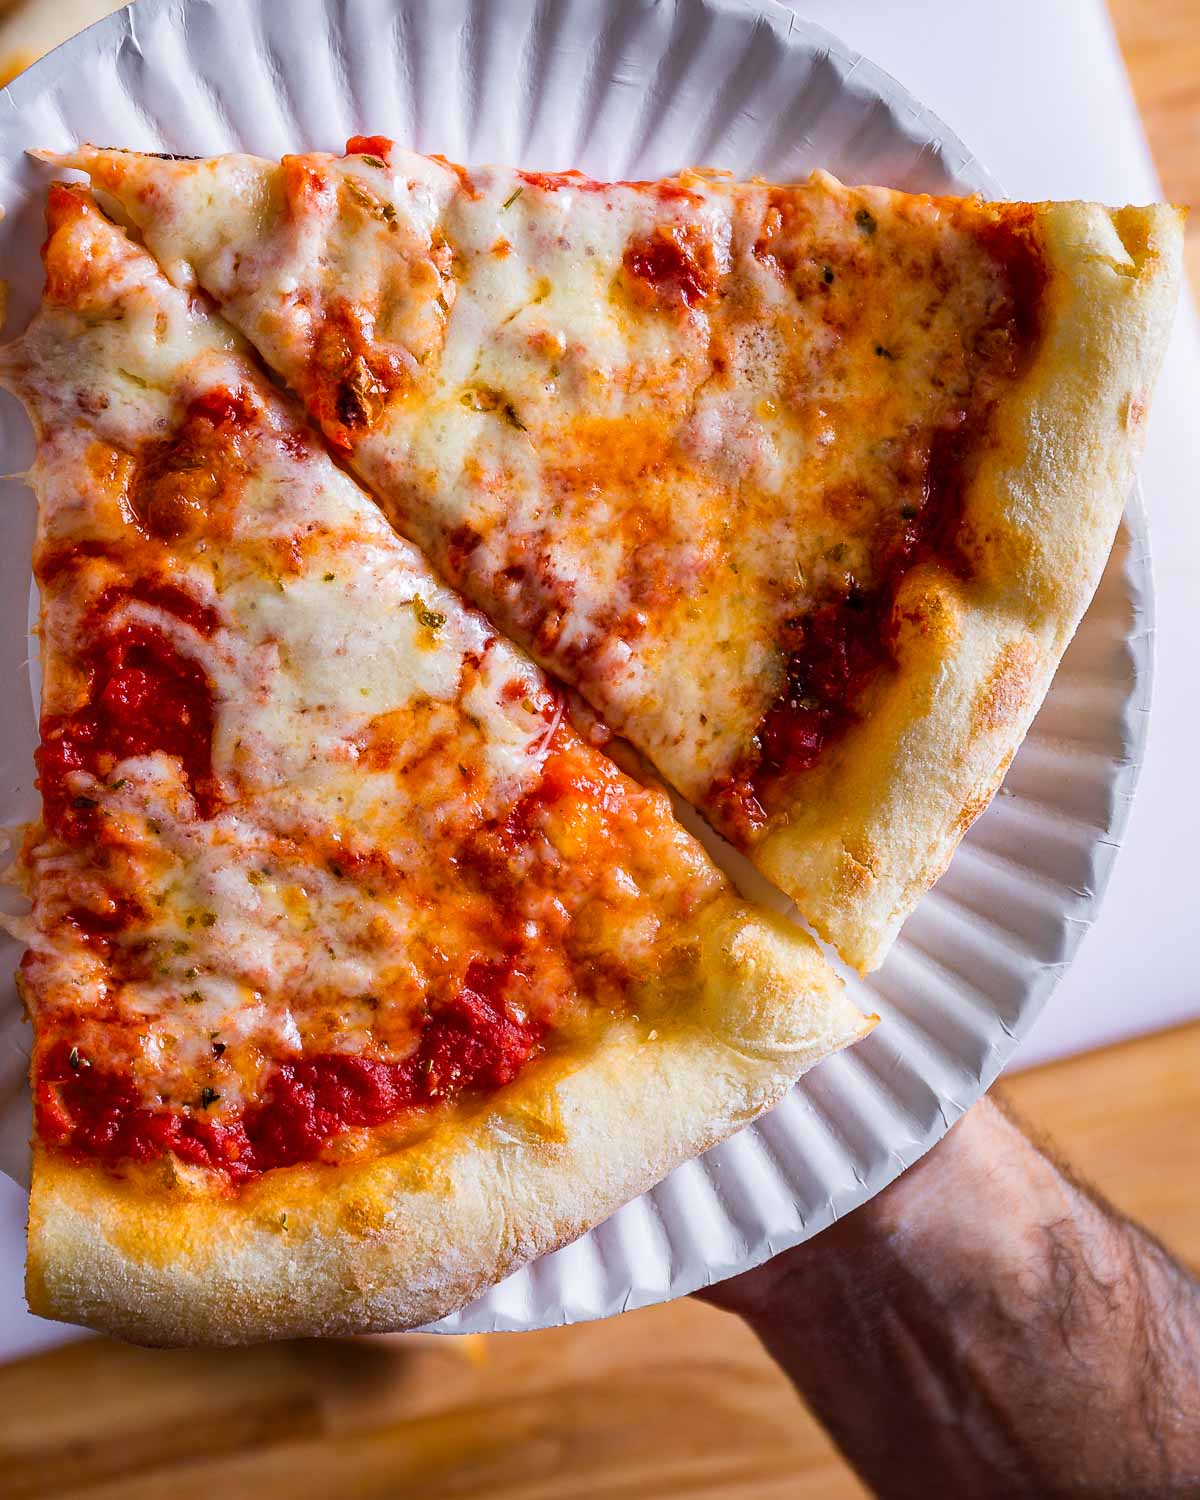 Two slices of New York pizza held in white plate.